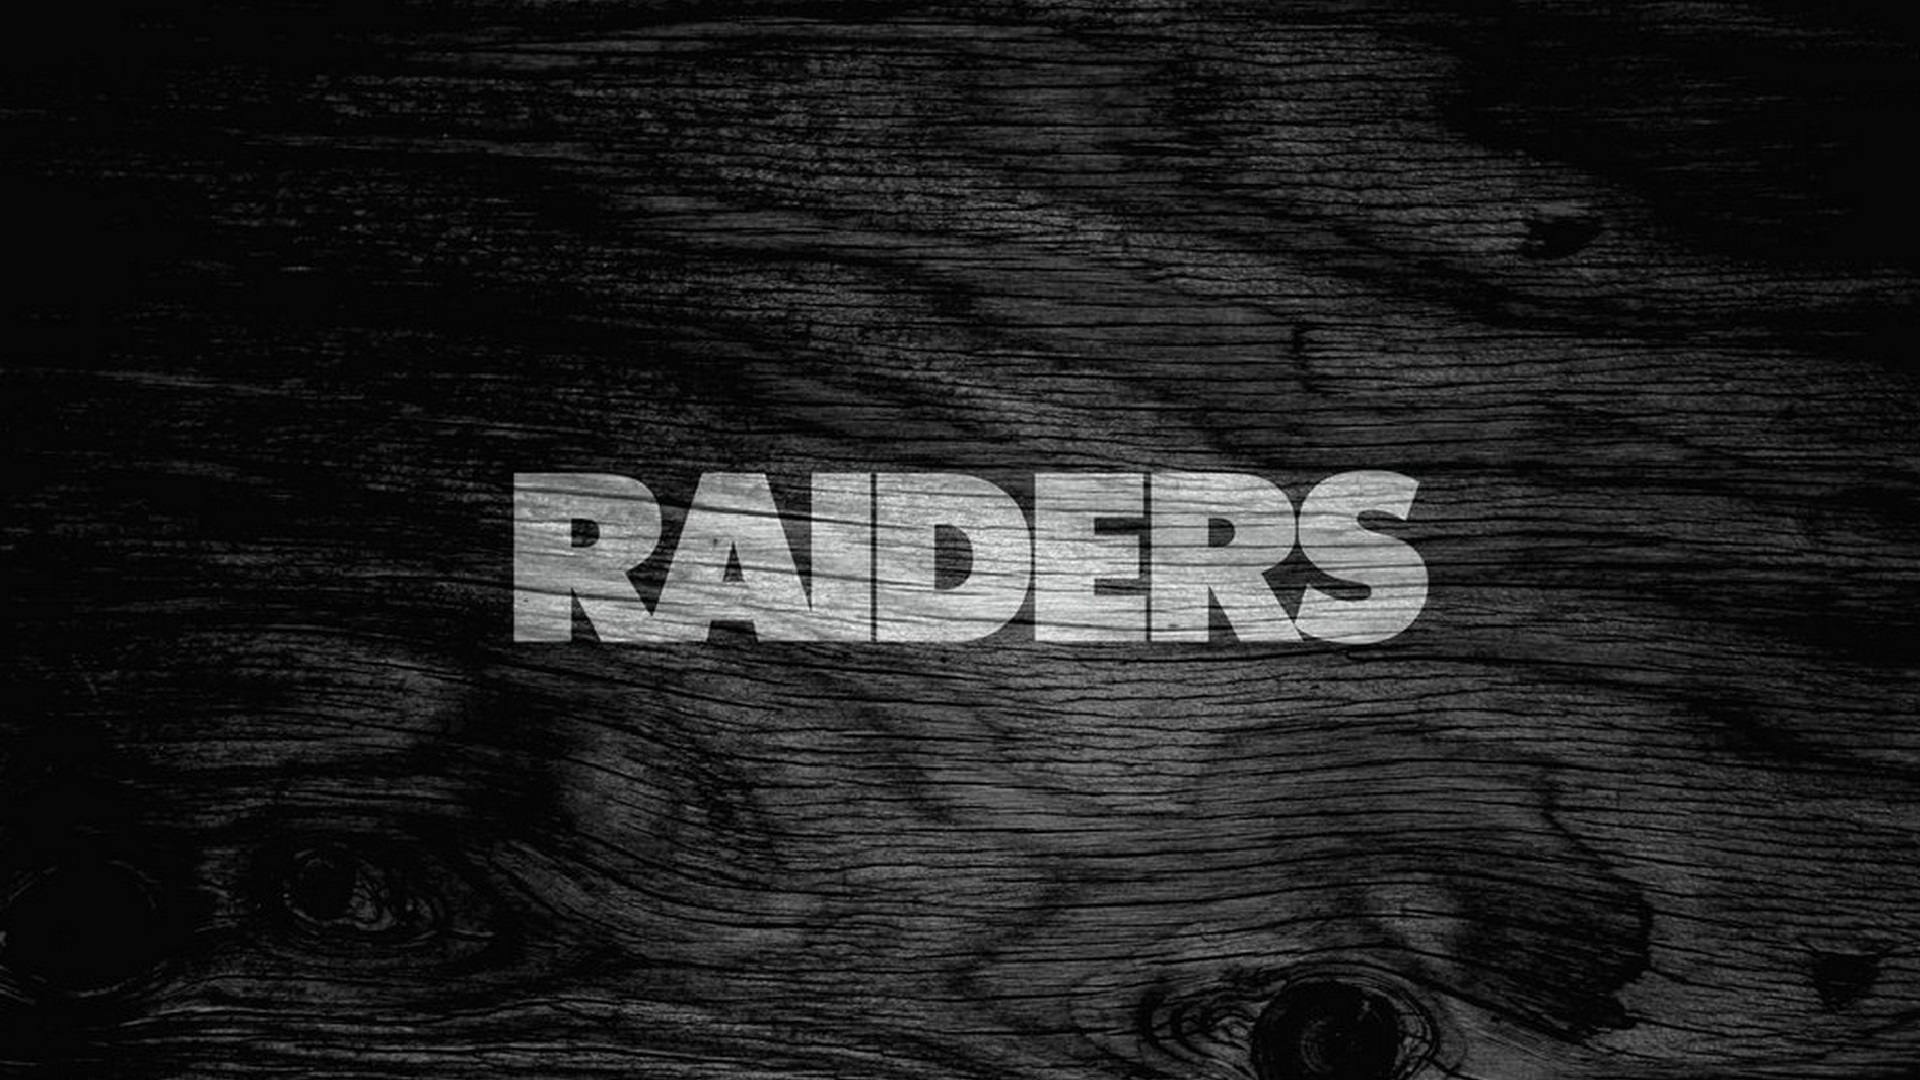 Wallpapers Oakland Raiders With high-resolution 1920X1080 pixel. You can use this wallpaper for your Mac or Windows Desktop Background, iPhone, Android or Tablet and another Smartphone device